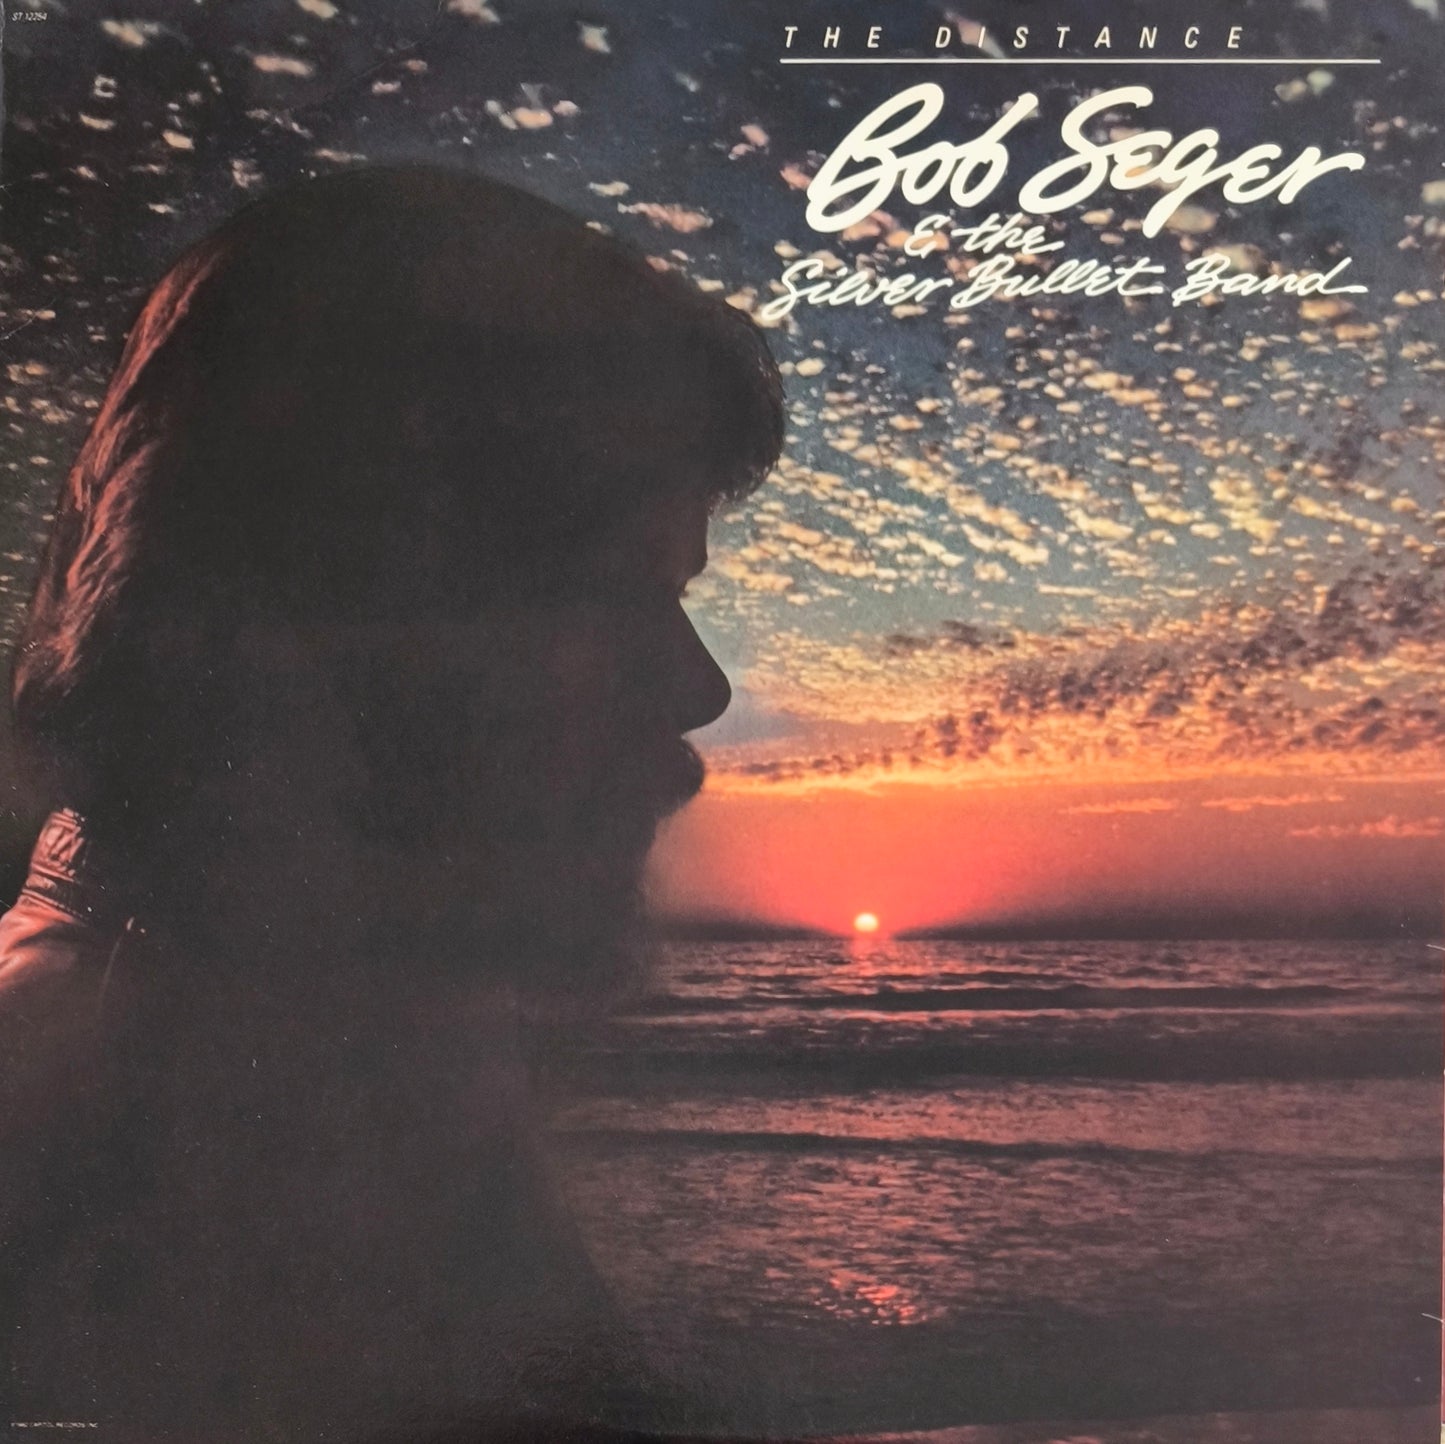 BOB SEGER AND THE SILVER BULLET BAND - The Distance (pressage US)